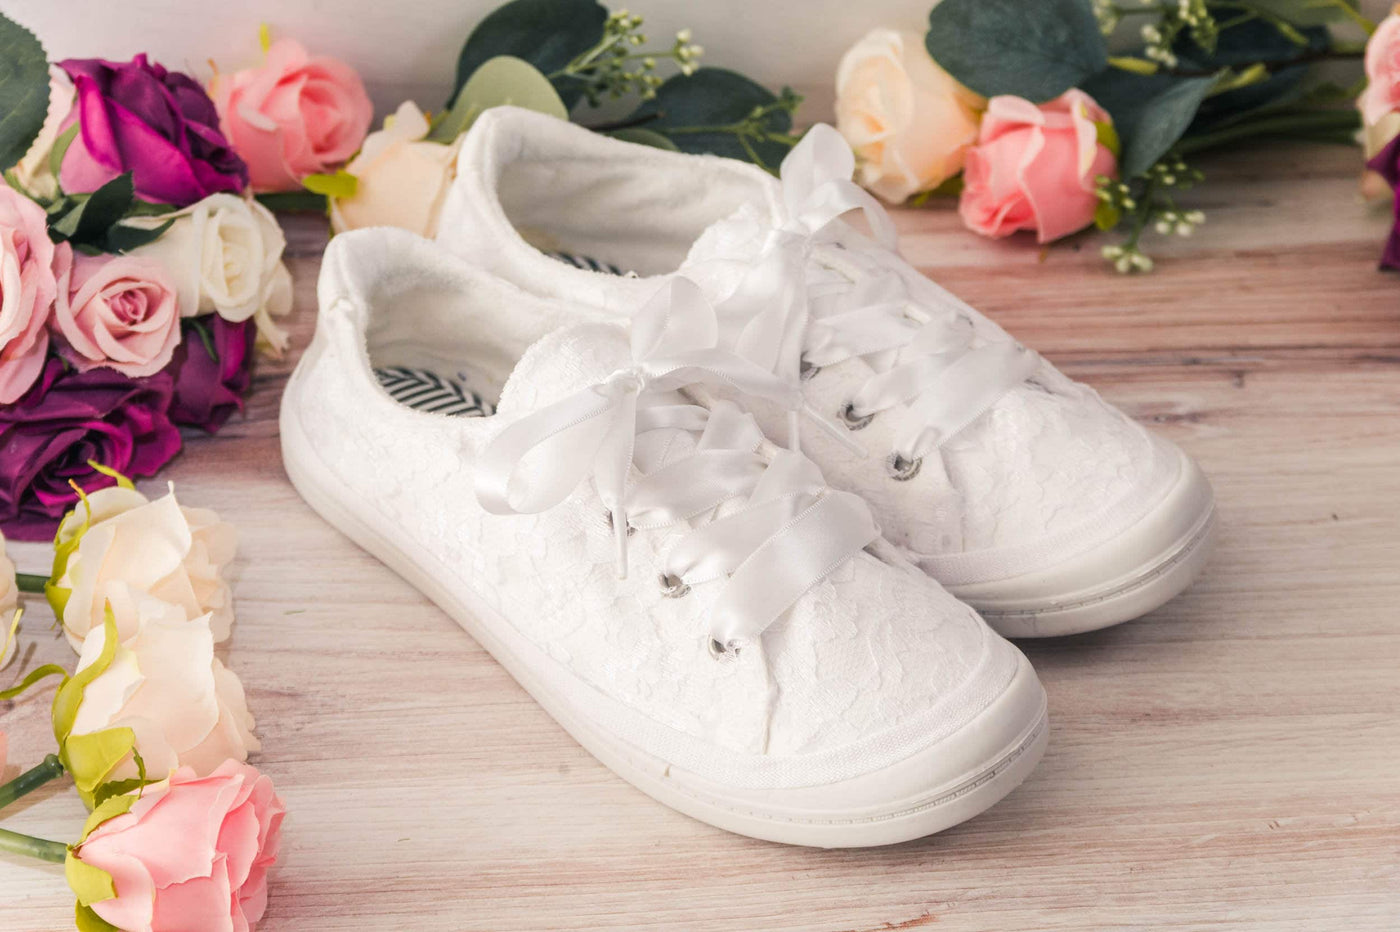 Wedding Shoes! Cute Bridal White Lace Slip On Sneakers for Brides, Bridesmaids, Reception Shoes, Custom Shoes, Gifts for Her